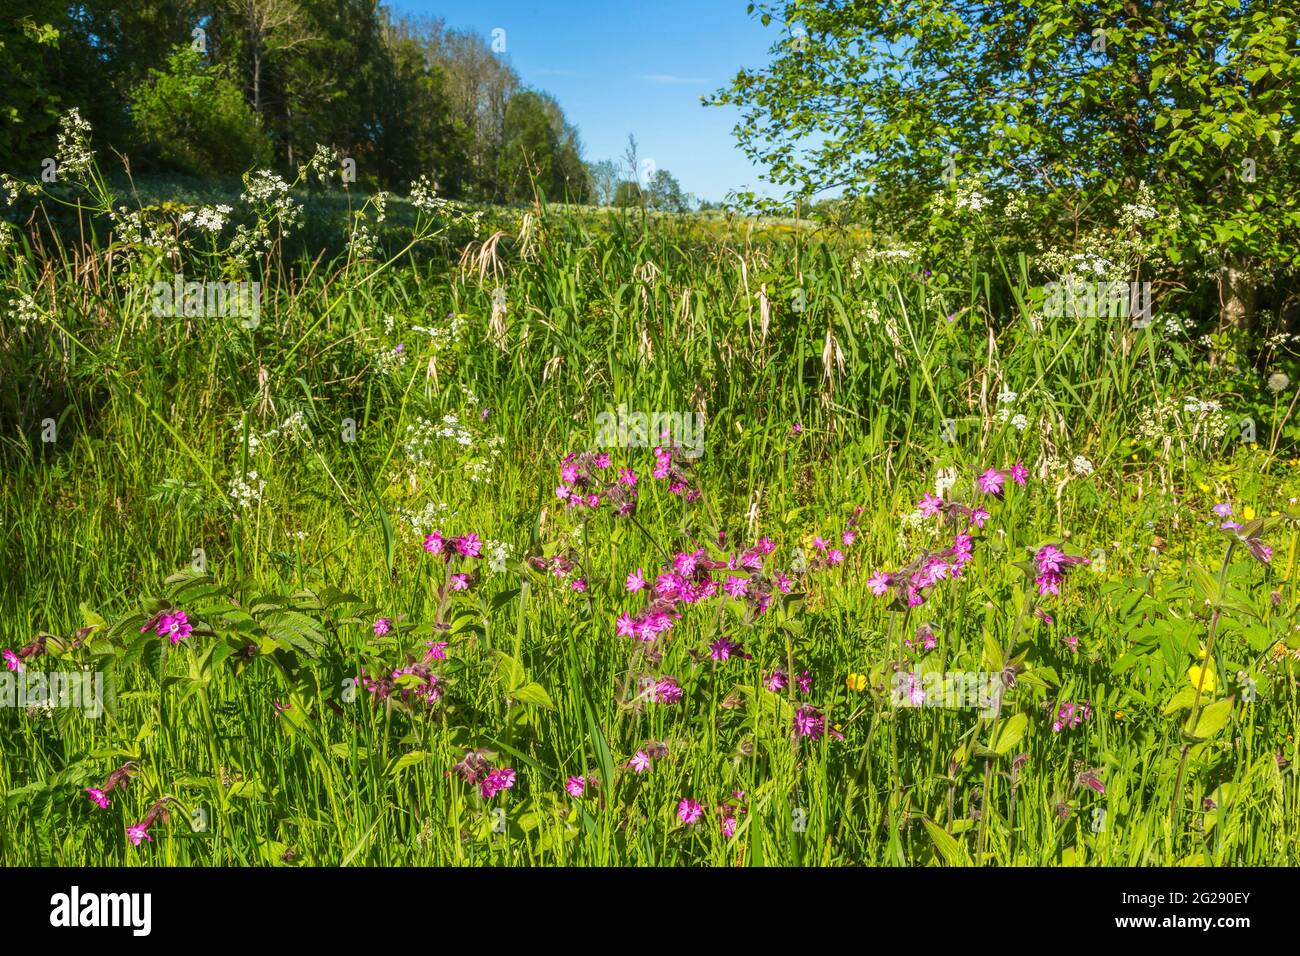 Red campion flowers on a summer meadow in rural landscape Stock Photo